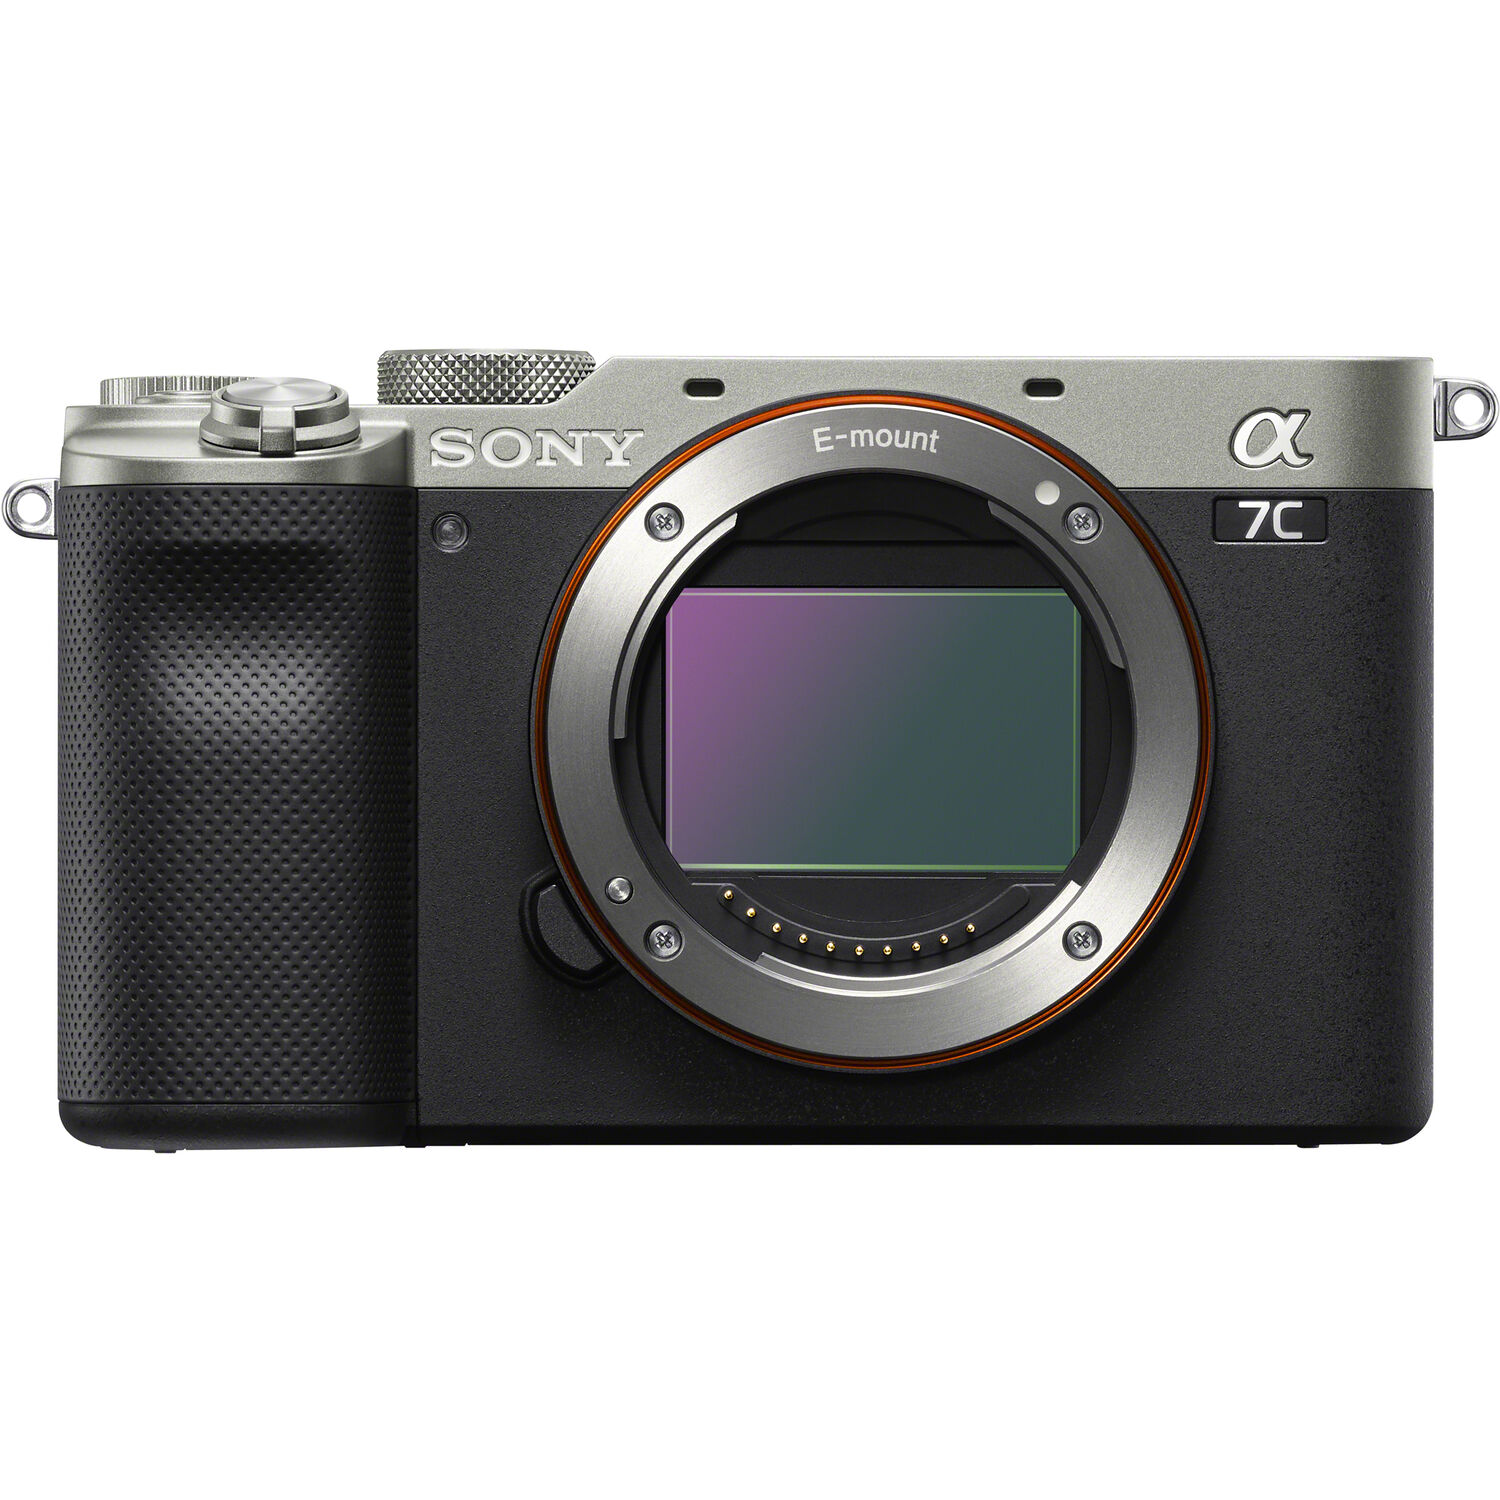 Sony Alpha a7C Mirrorless Camera (Silver) - Body Only